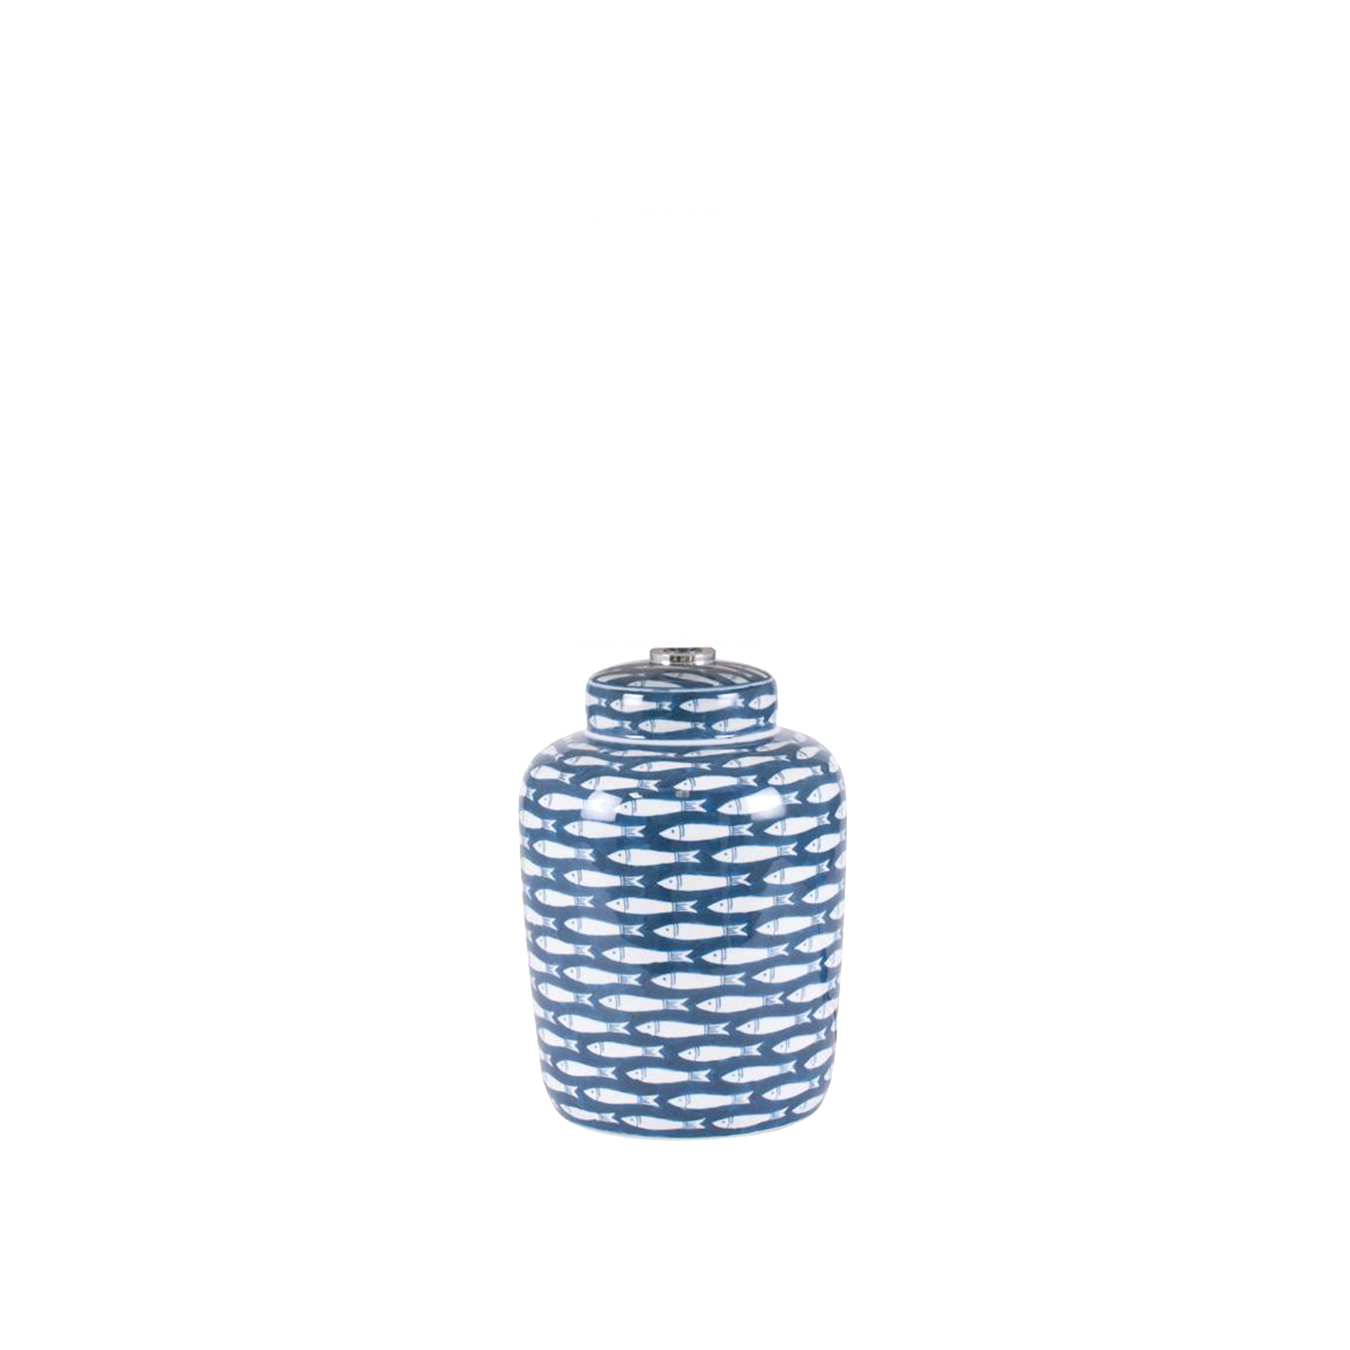 Blue and White Fish Detail Ceramic Table Lamp